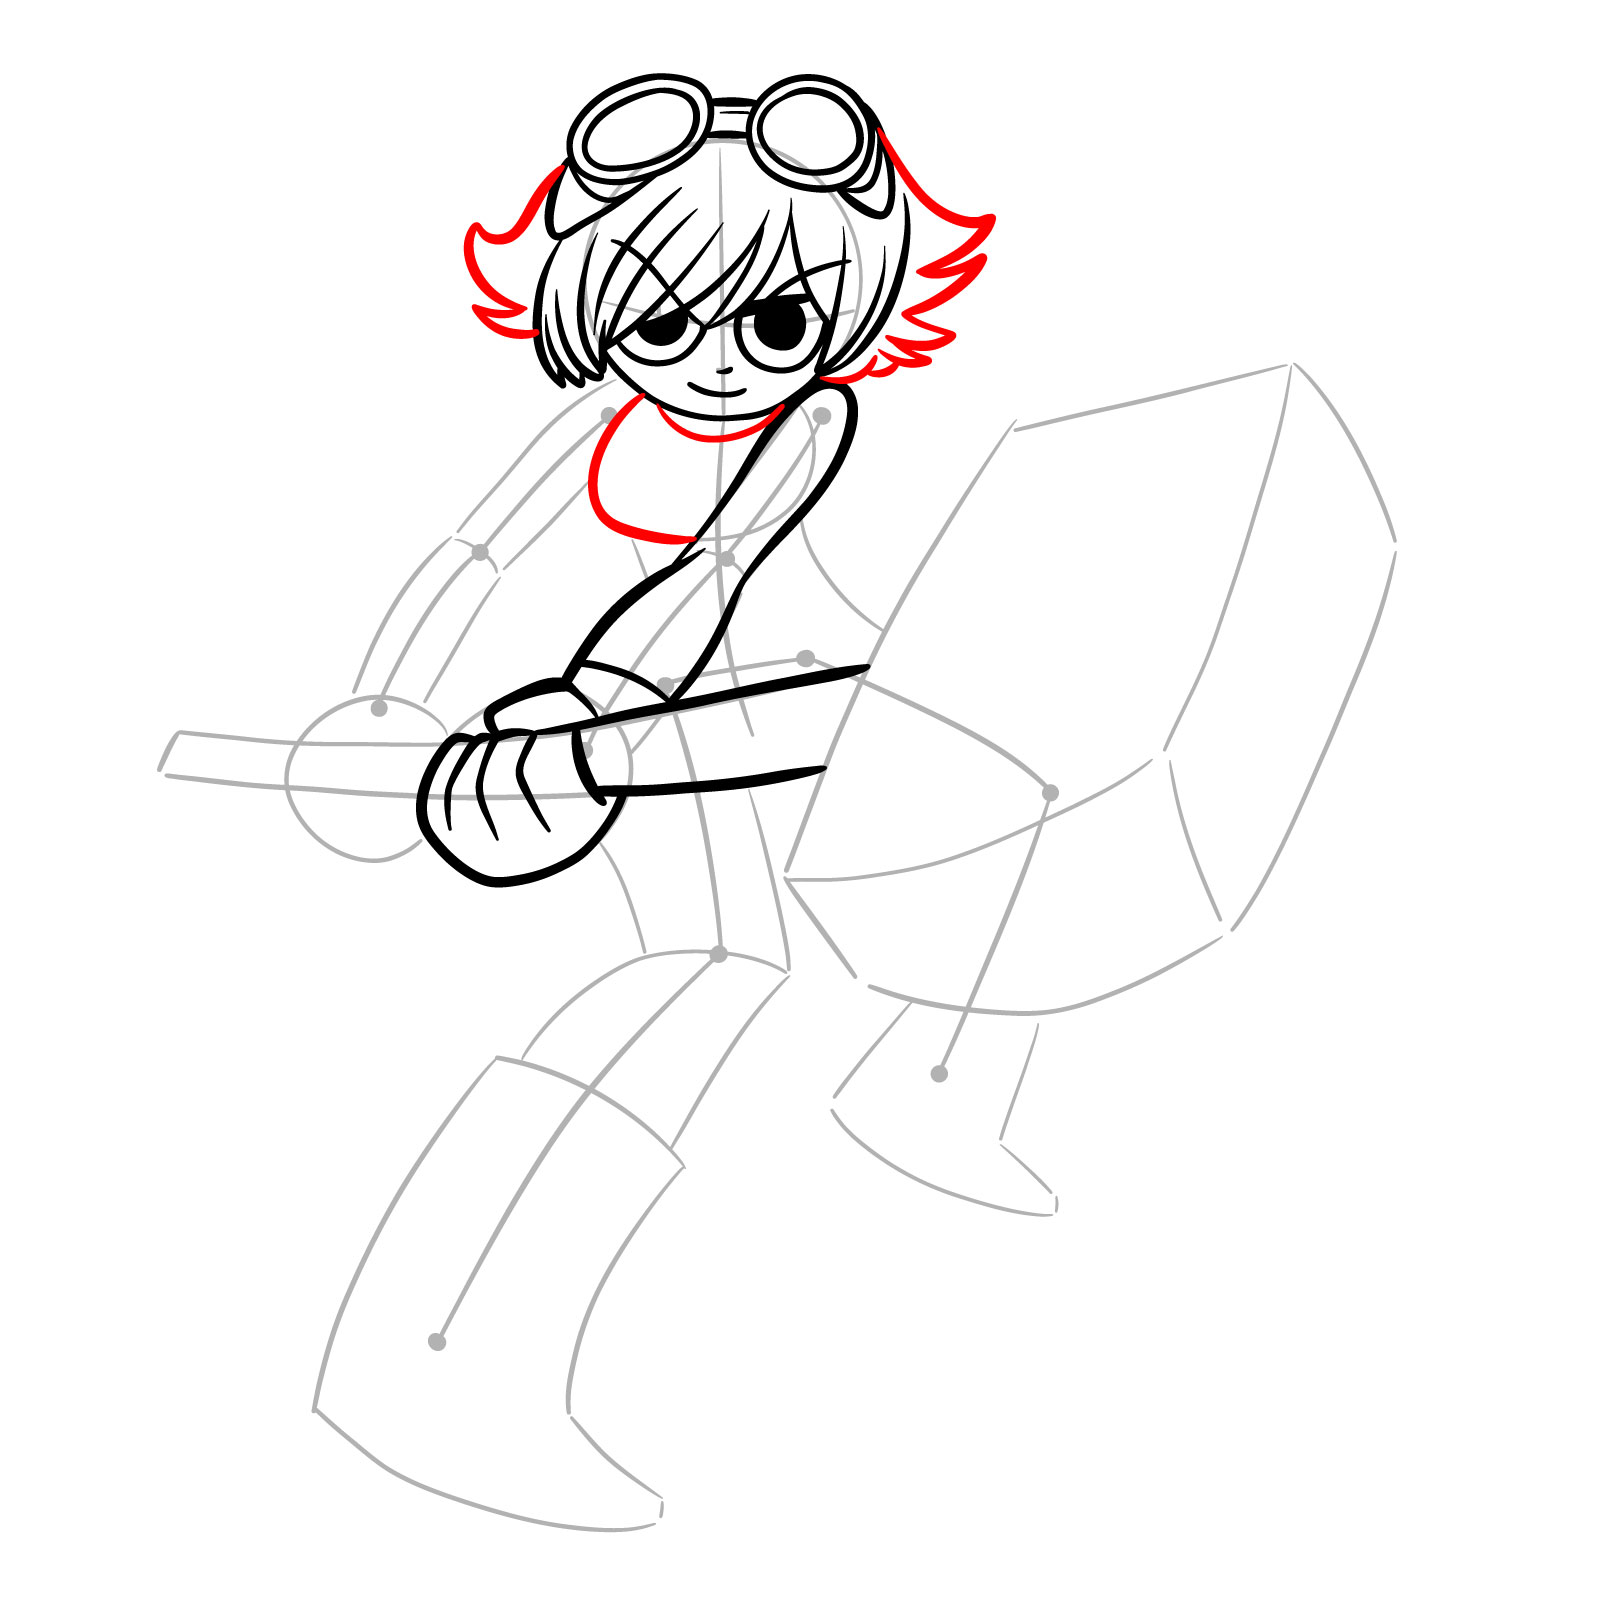 Ramona Flowers with her Large Hammer drawing - easy step-by-step guide - step 12